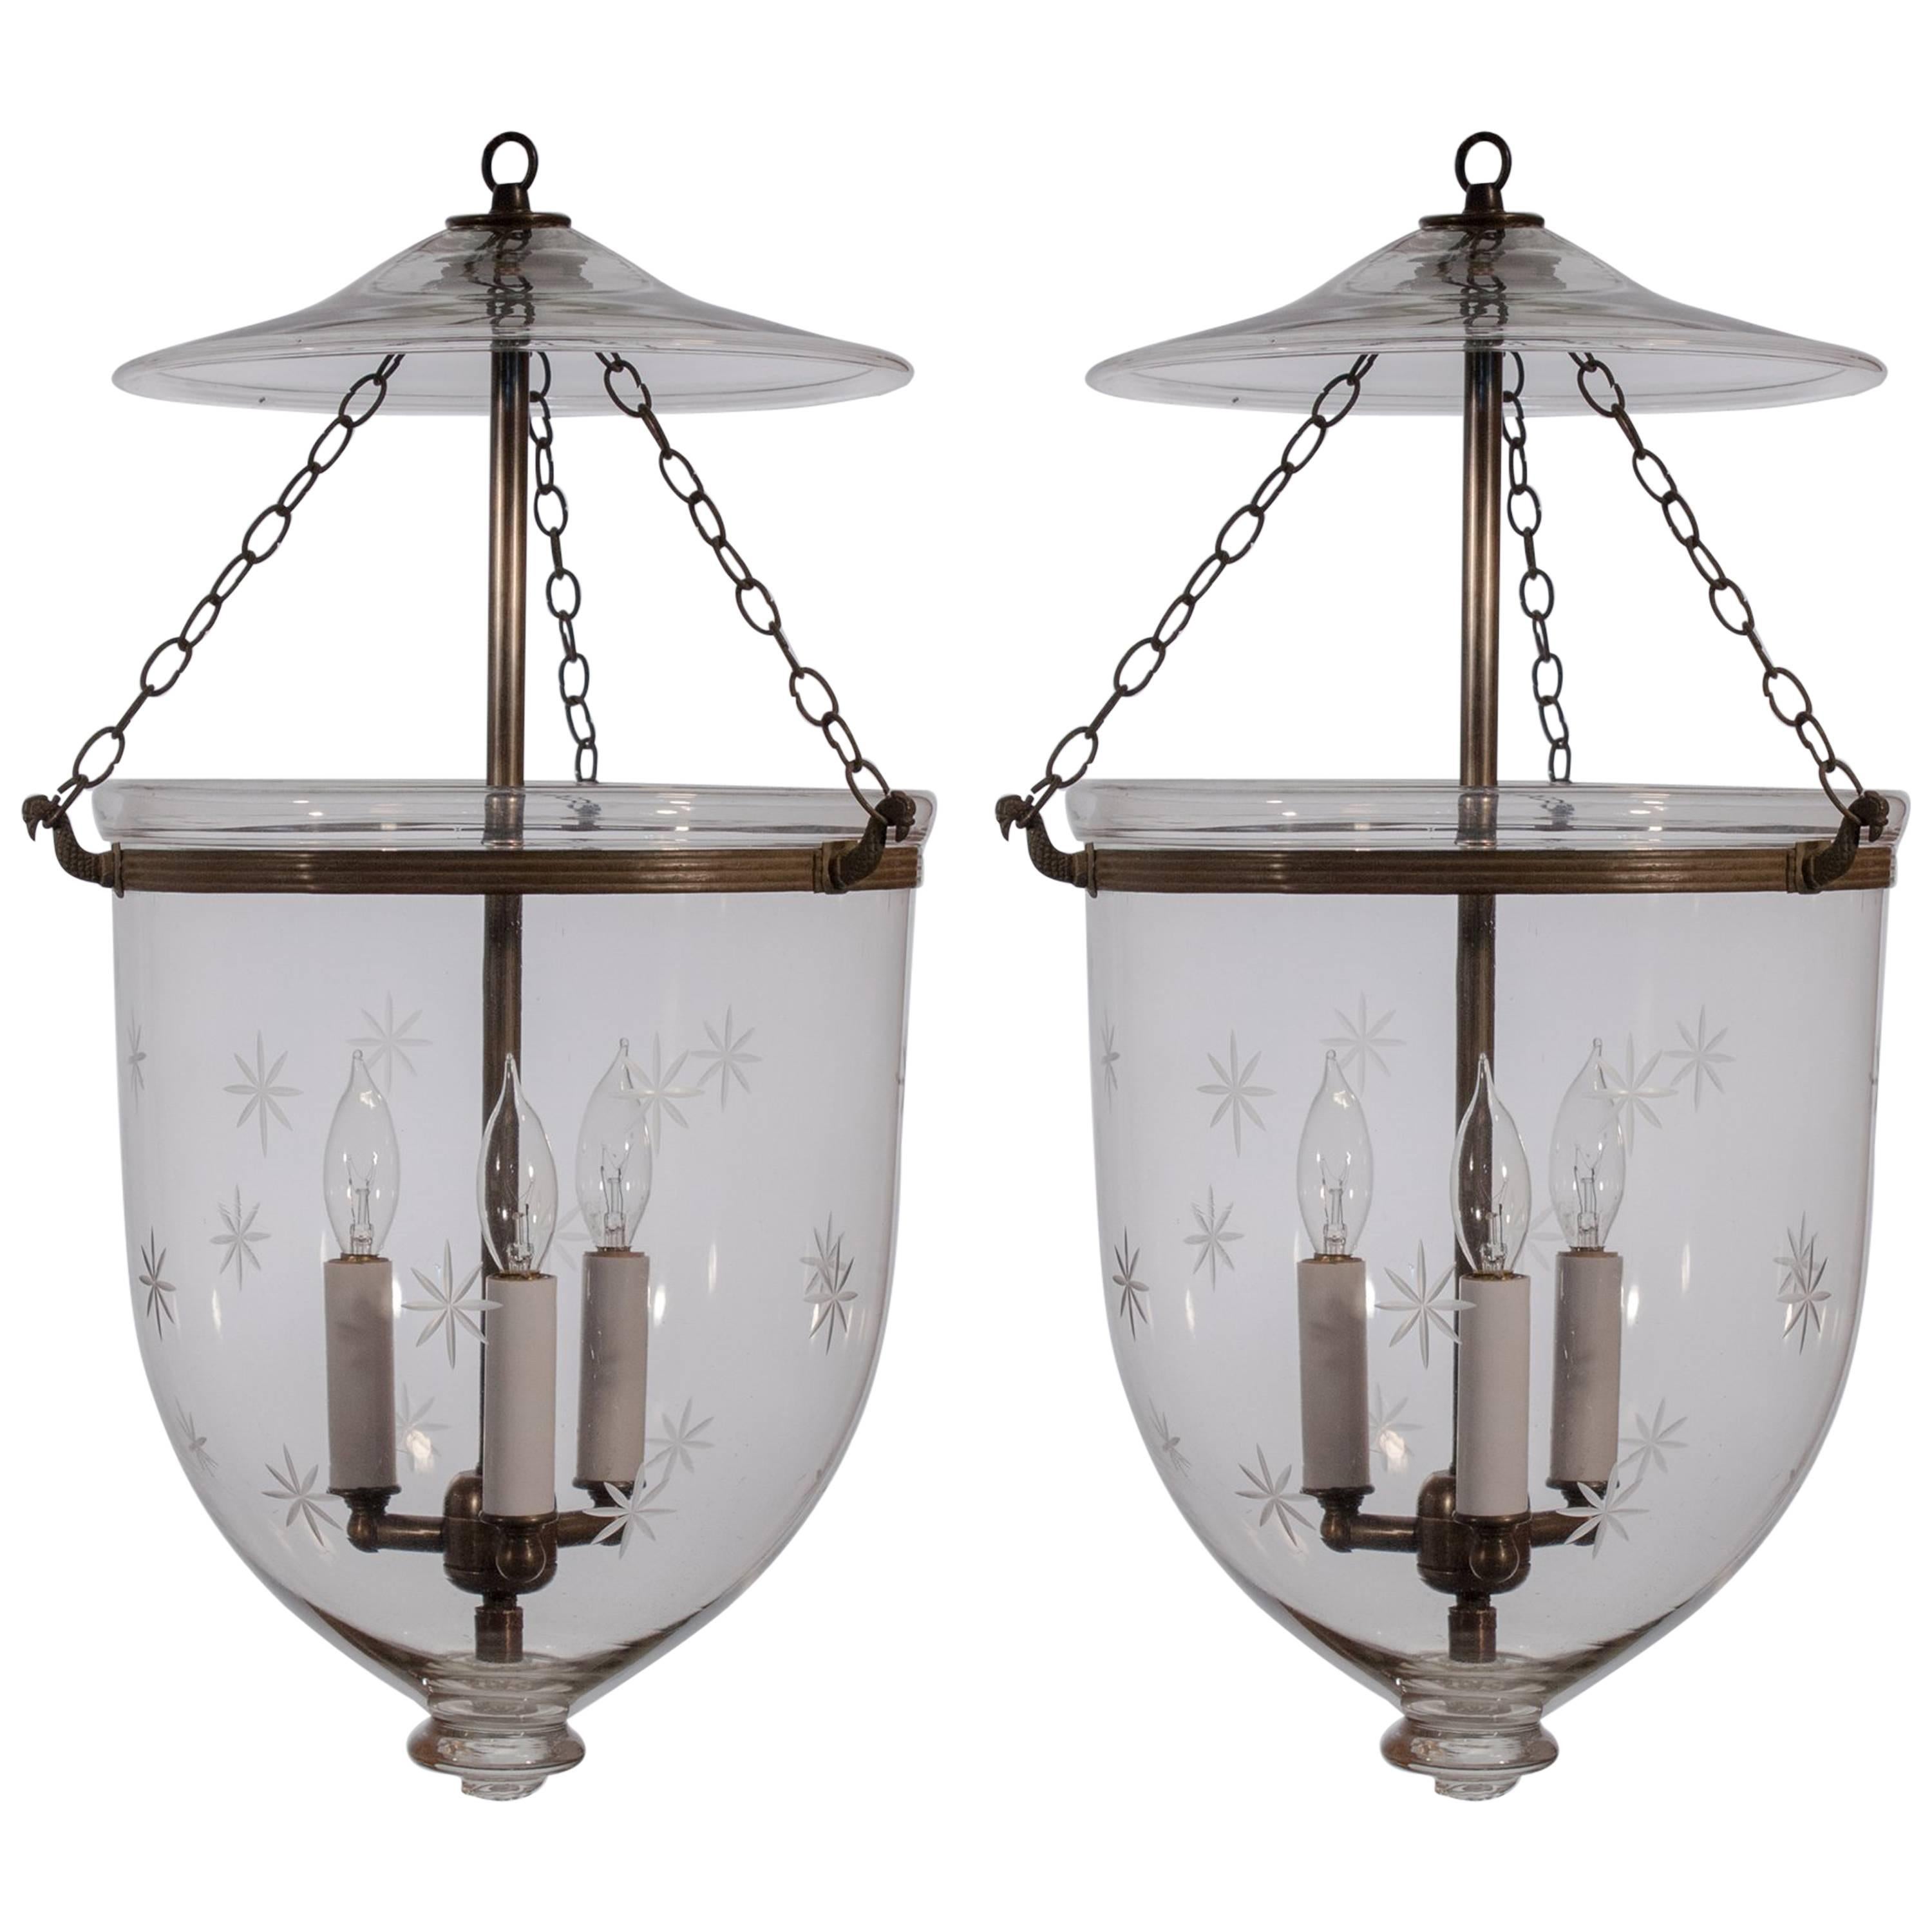 Pair of English Bell Jar Lanterns with Etched Stars